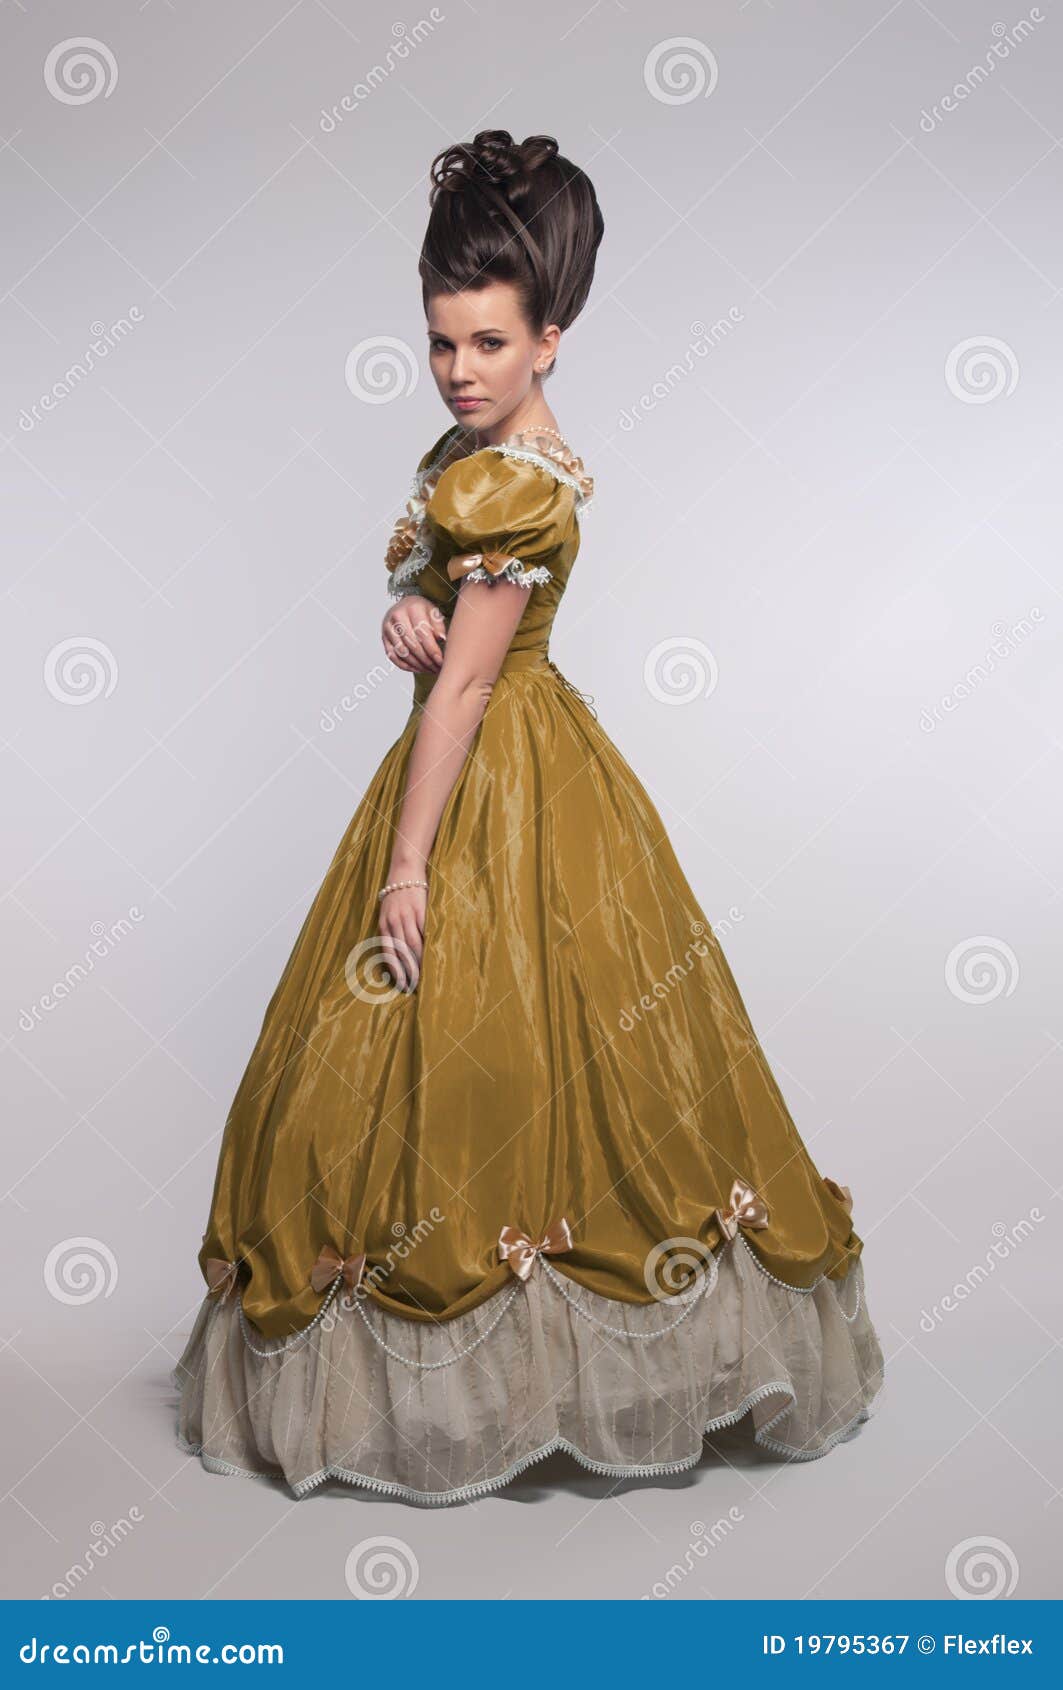 Old Fashioned Girl In Yellow Dress Royalty Free Stock Photography ...